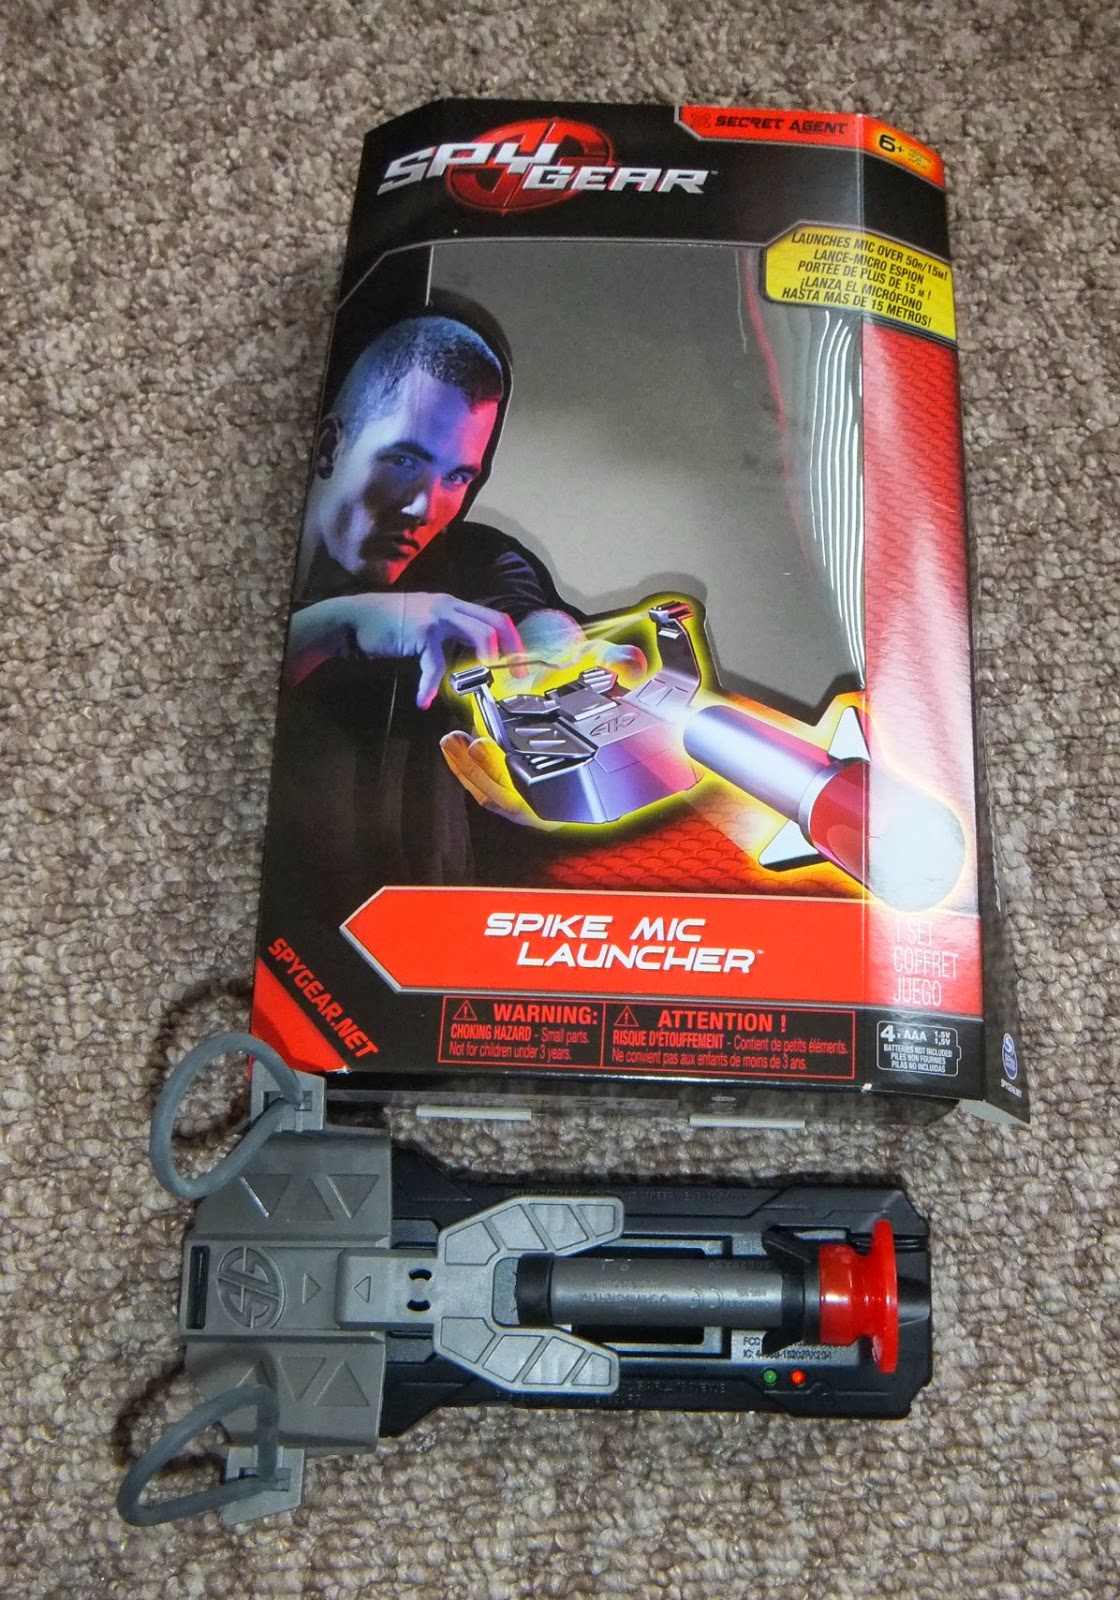 Fun as a Gran: Mission Impossible with Spin Master Spy Gear - a review.